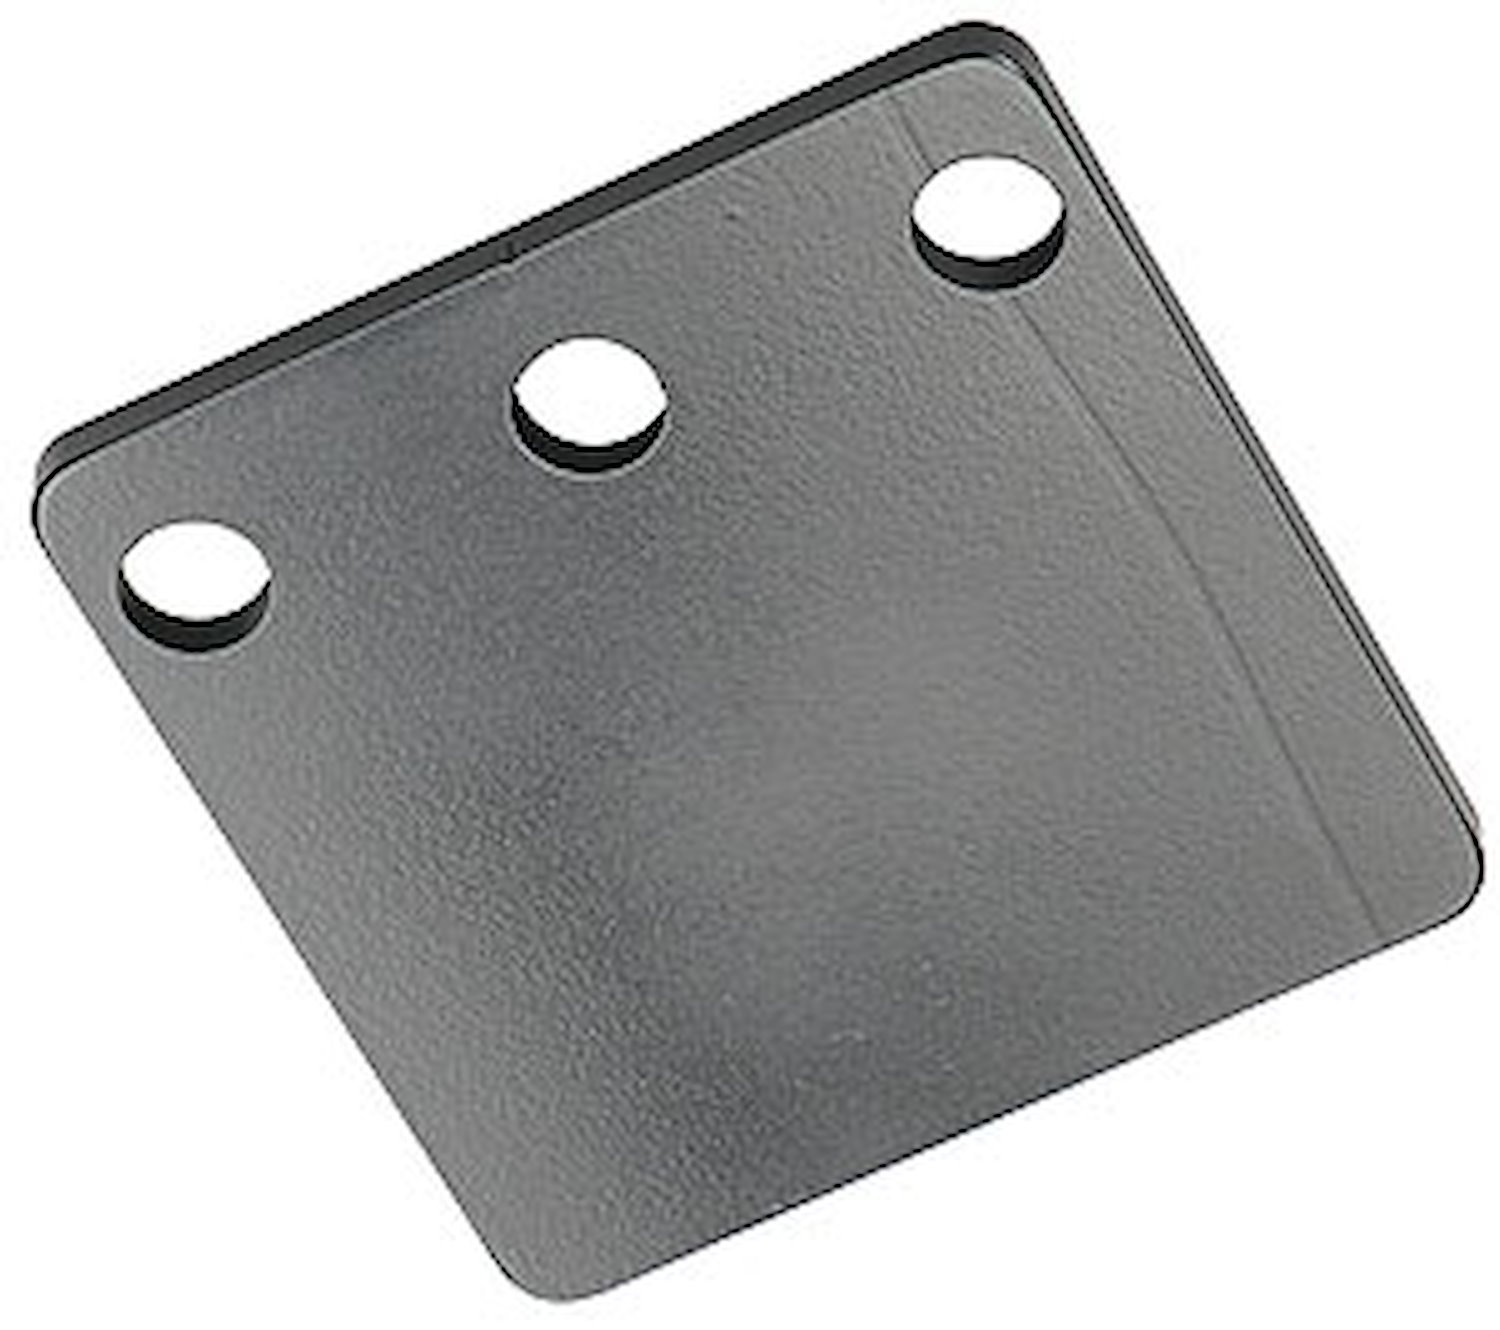 Flat Mounting Bracket For Use With 497-3300, 497-3302, 497-3343, 497-3344, 497-3347